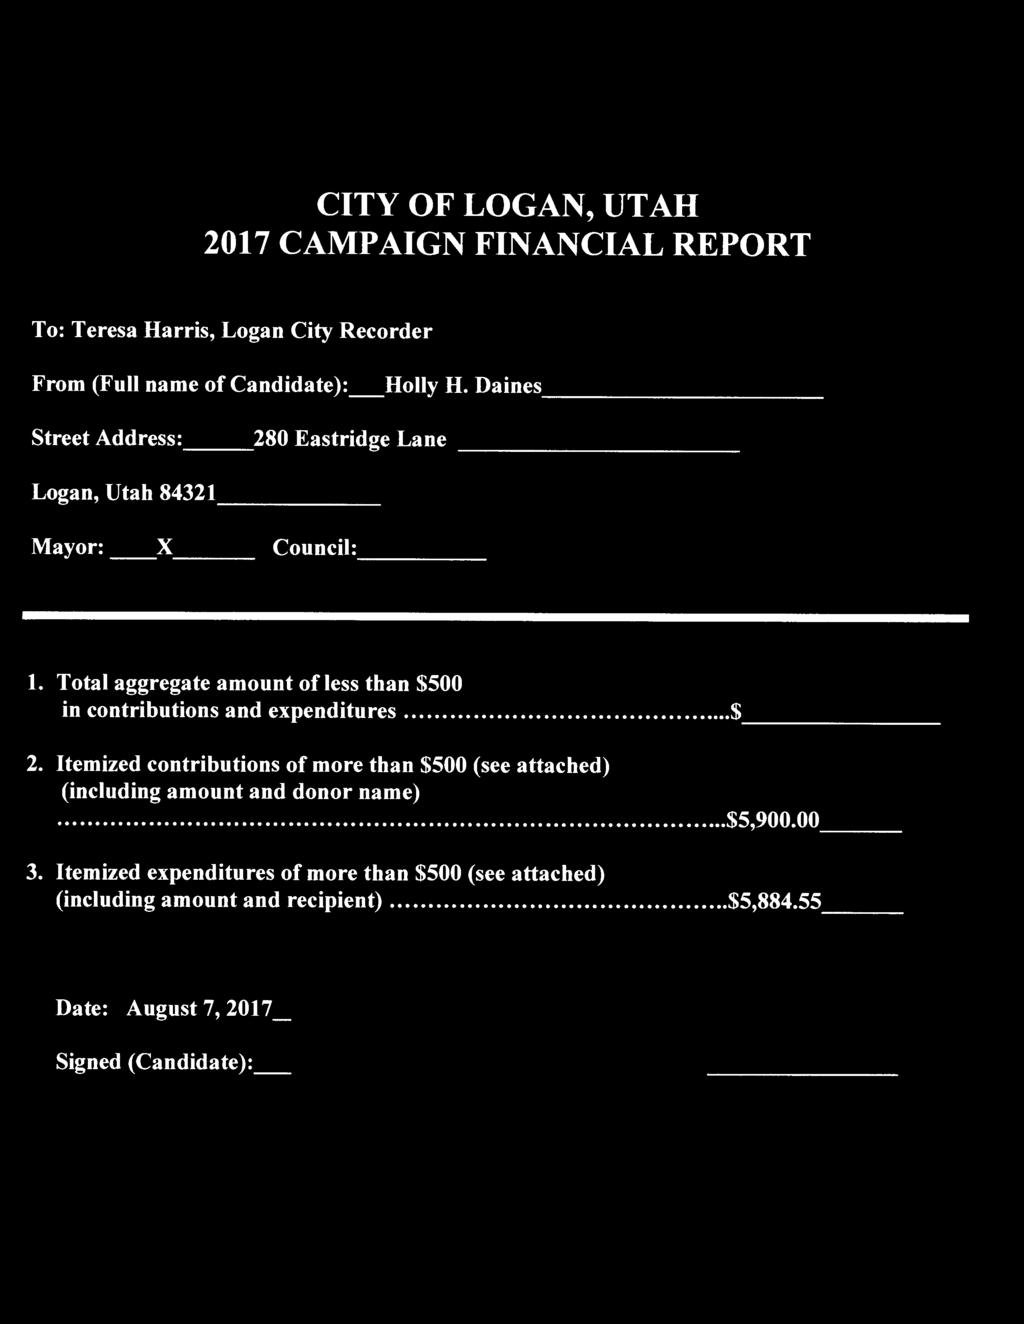 LOGAN c1n UNITED IN SERVICE ~ received ~I Y/1111 I ESTABLISHED 1866 CITY OF LOGAN, UTAH 2017 CAMPAIGN FINANCIAL REPORT To: Teresa Harris, Logan City Recorder From (Full name of